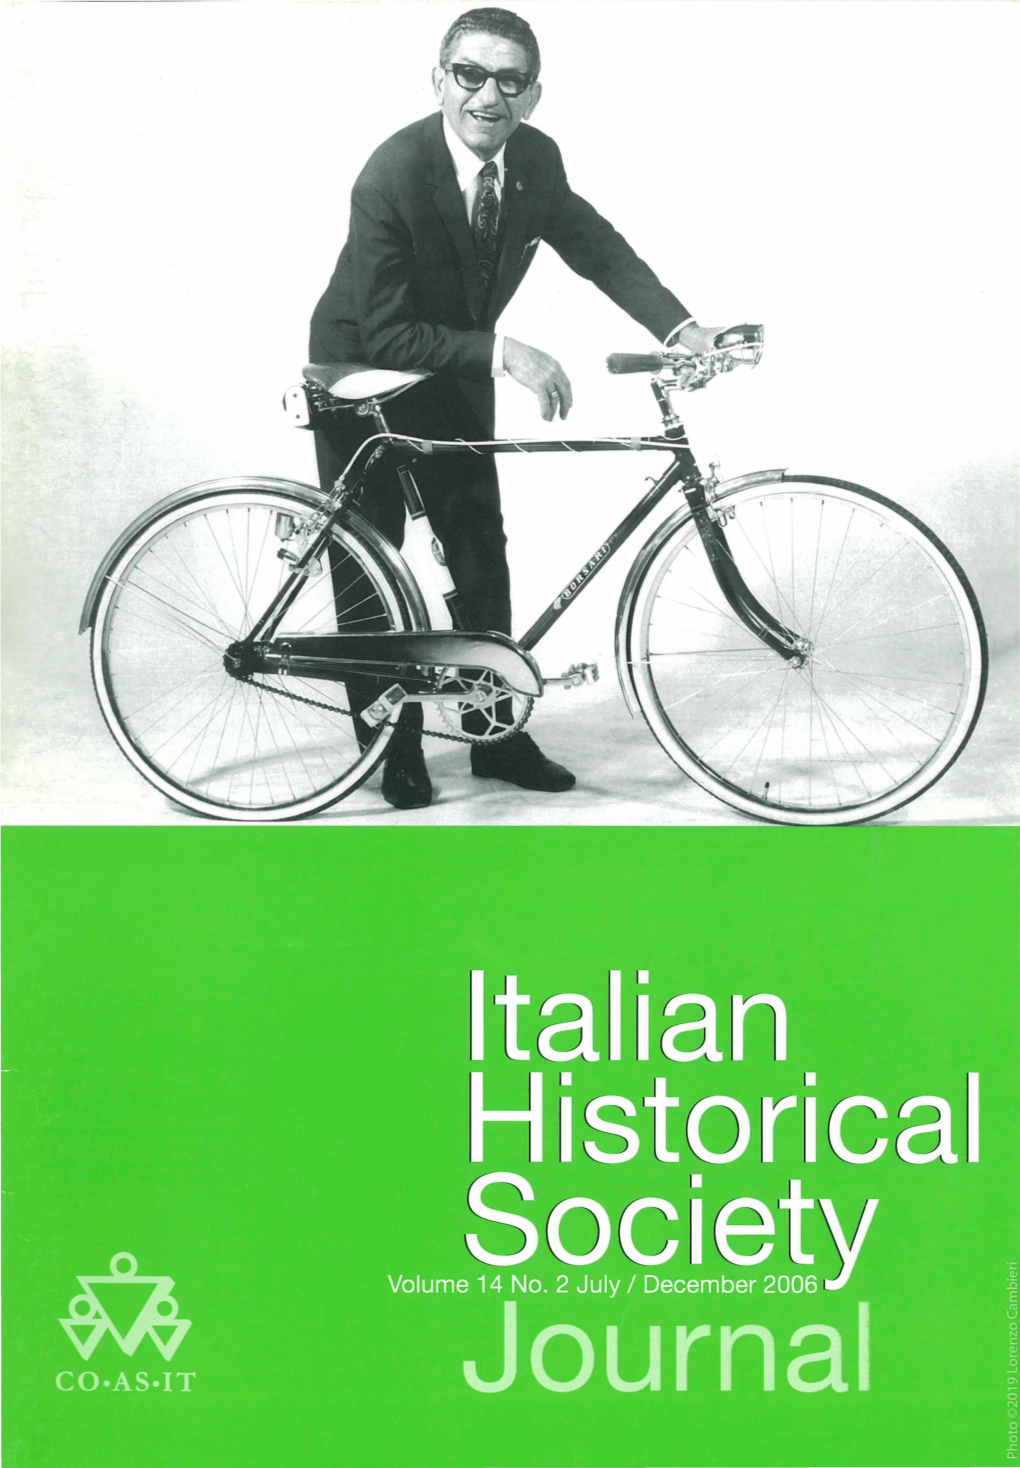 IHS Journal Are Those of the Contributors and Do Not Necessarily Reflect Those of the Italian Historical Society